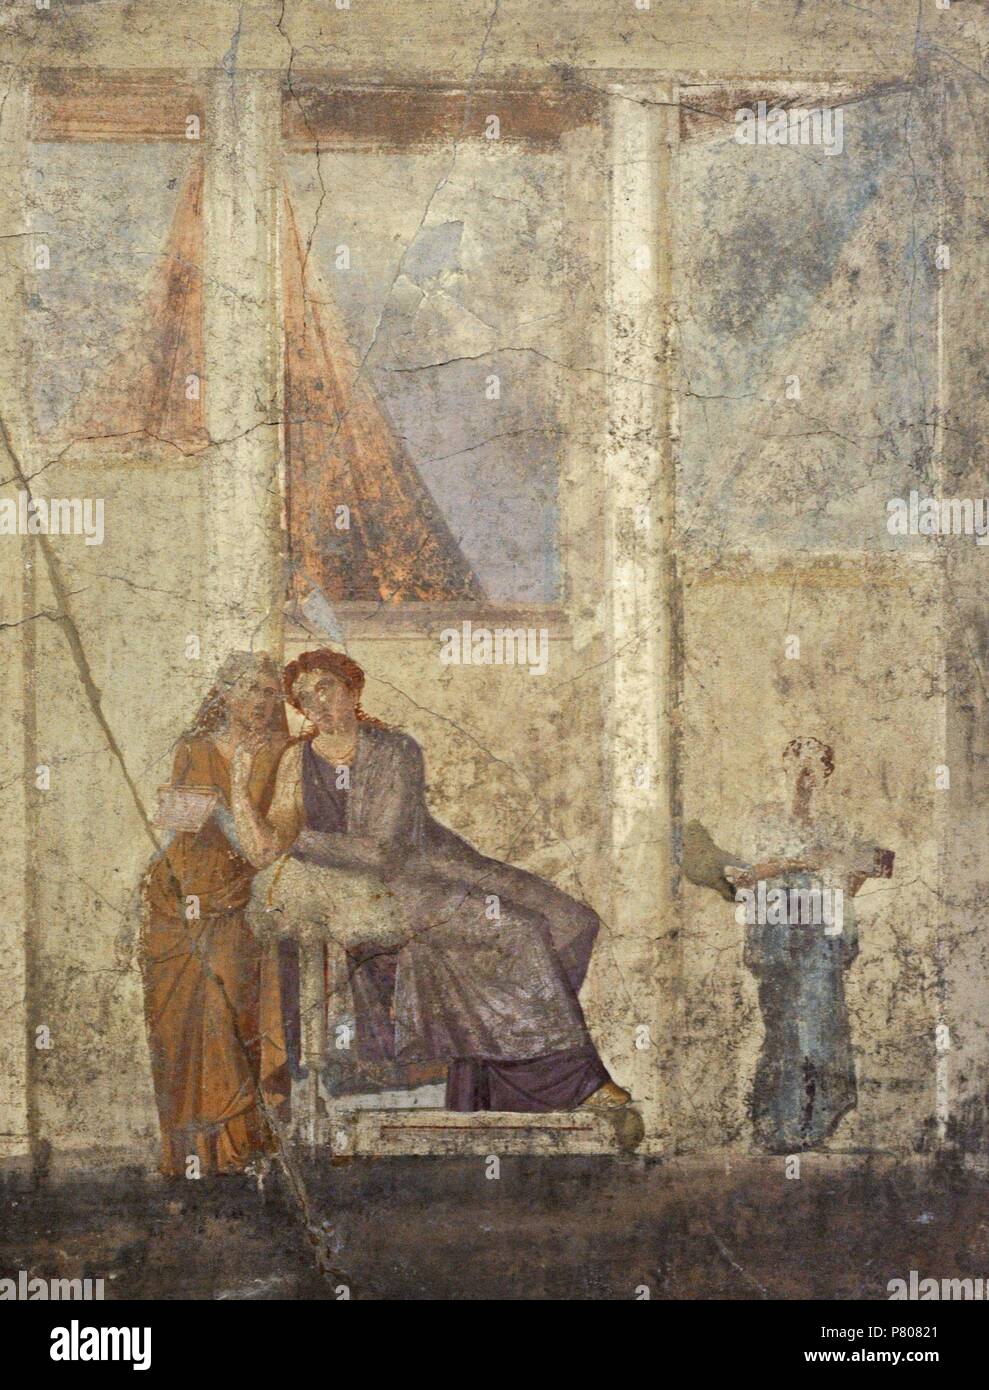 Roman fresco depicting Phaedra, tormented by the unrequited love of his stepson Hippolytus, delivers a letter in which he accuses him and what will lead to his death. House of Jason (20-25). Pompeii. National Archaeological Museum. Naples. Italy. Stock Photo